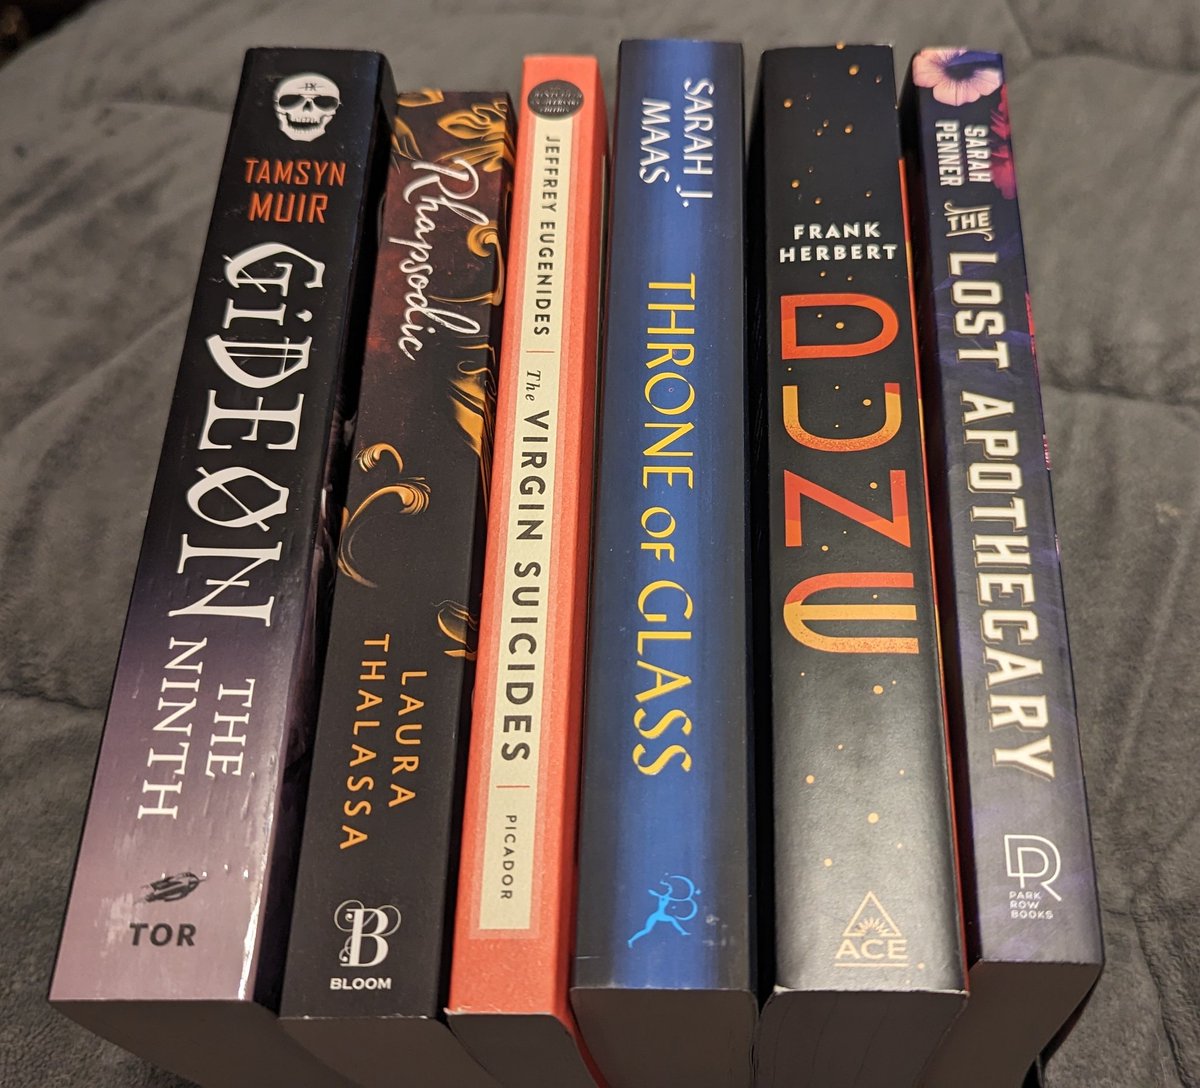 My Target Black Friday haul! I'm so excited to finally read these. Let me know which one I should read first! Shout out to my husband who let me put all of this on his Red card and won't let me pay him back 🥹 #target #bookmail #blackfridayhaul